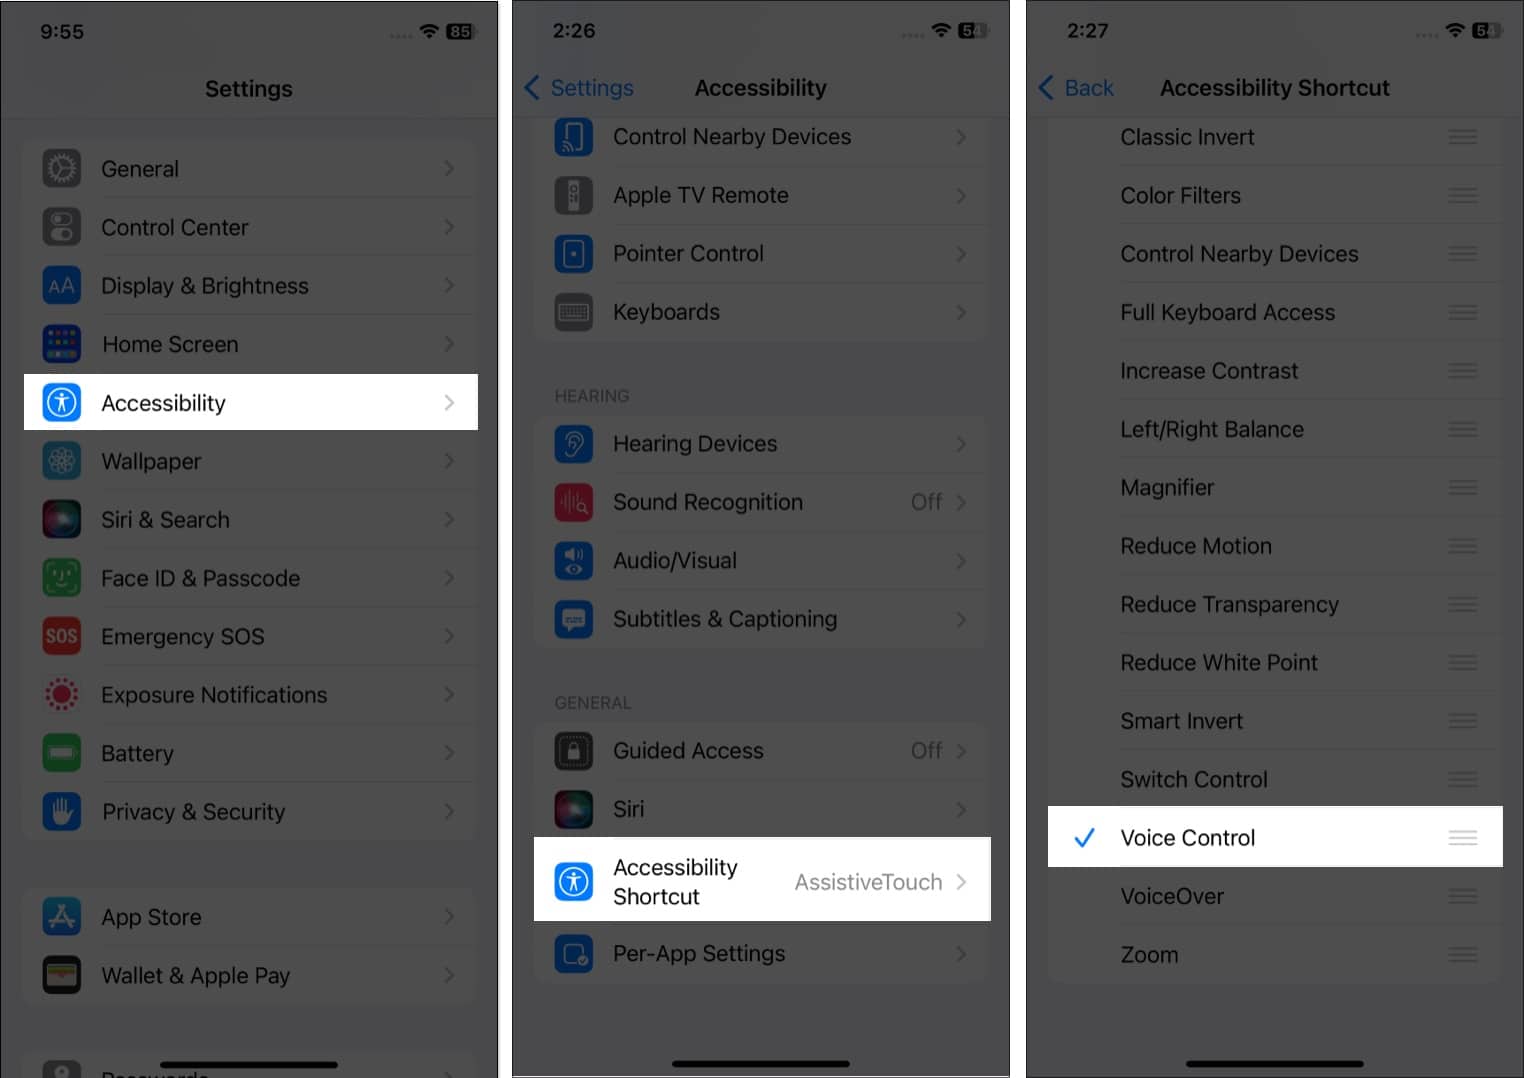 Adding Voice Control to the accessibility shortcuts on iPhone